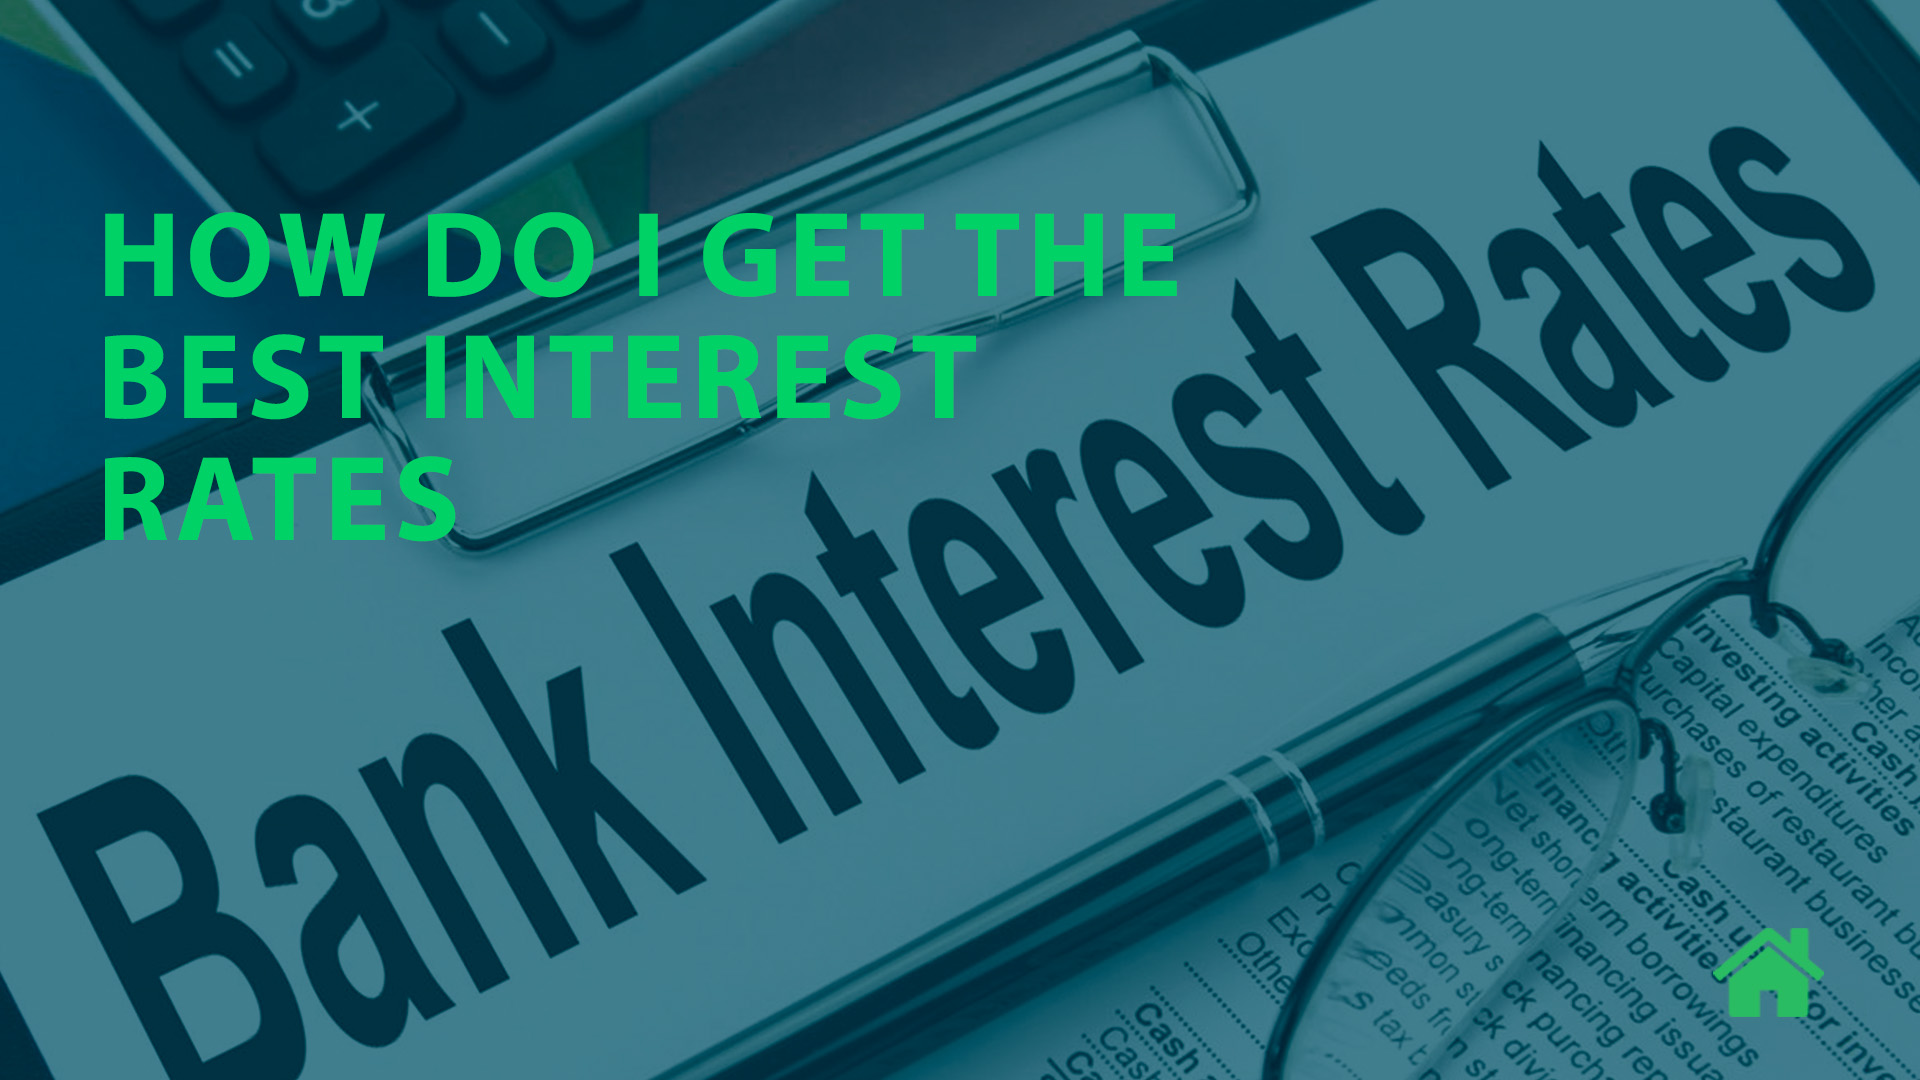 How do I get the best interest rates?